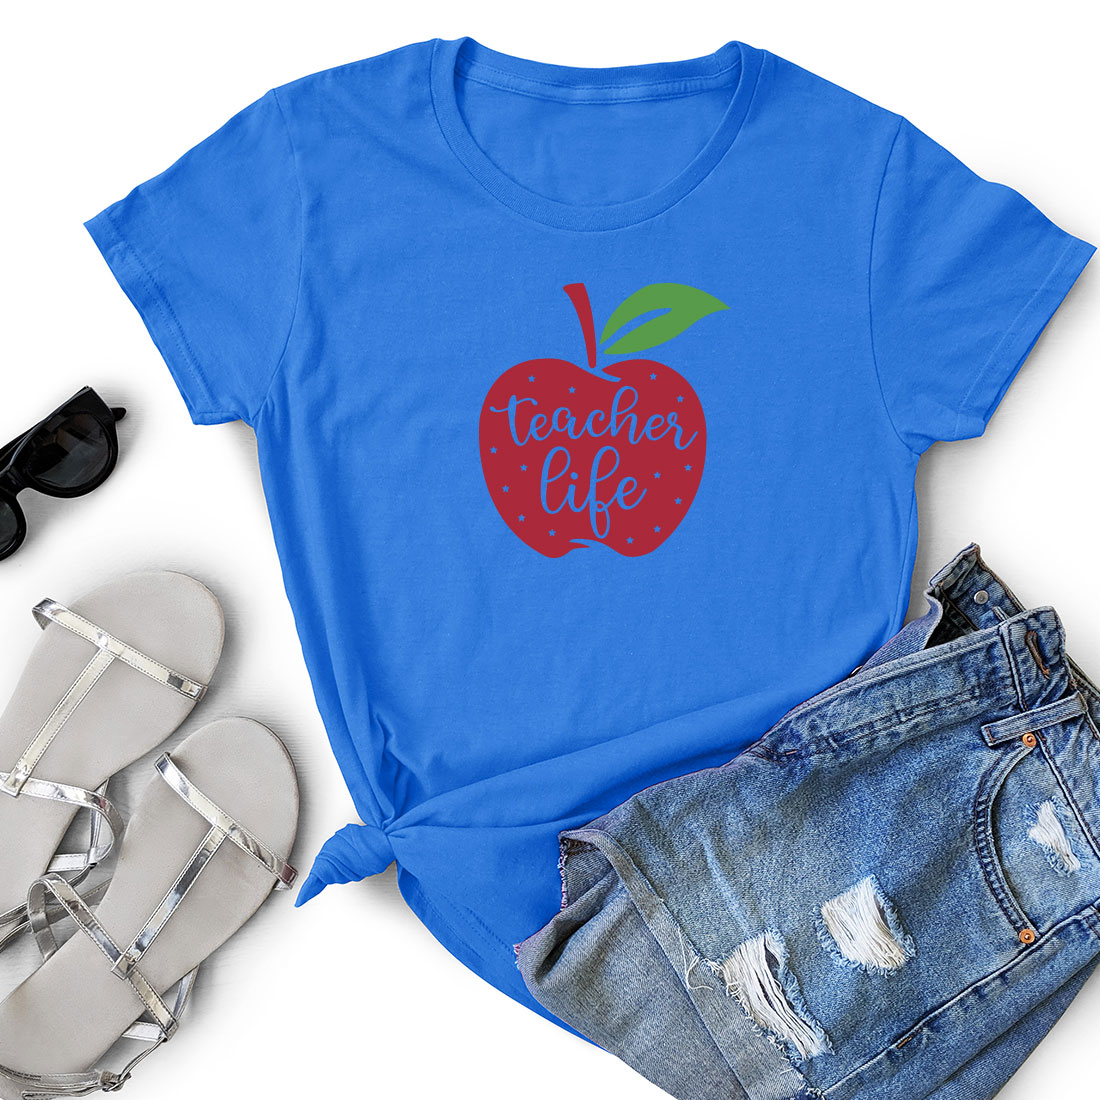 Blue shirt with a red apple on it.